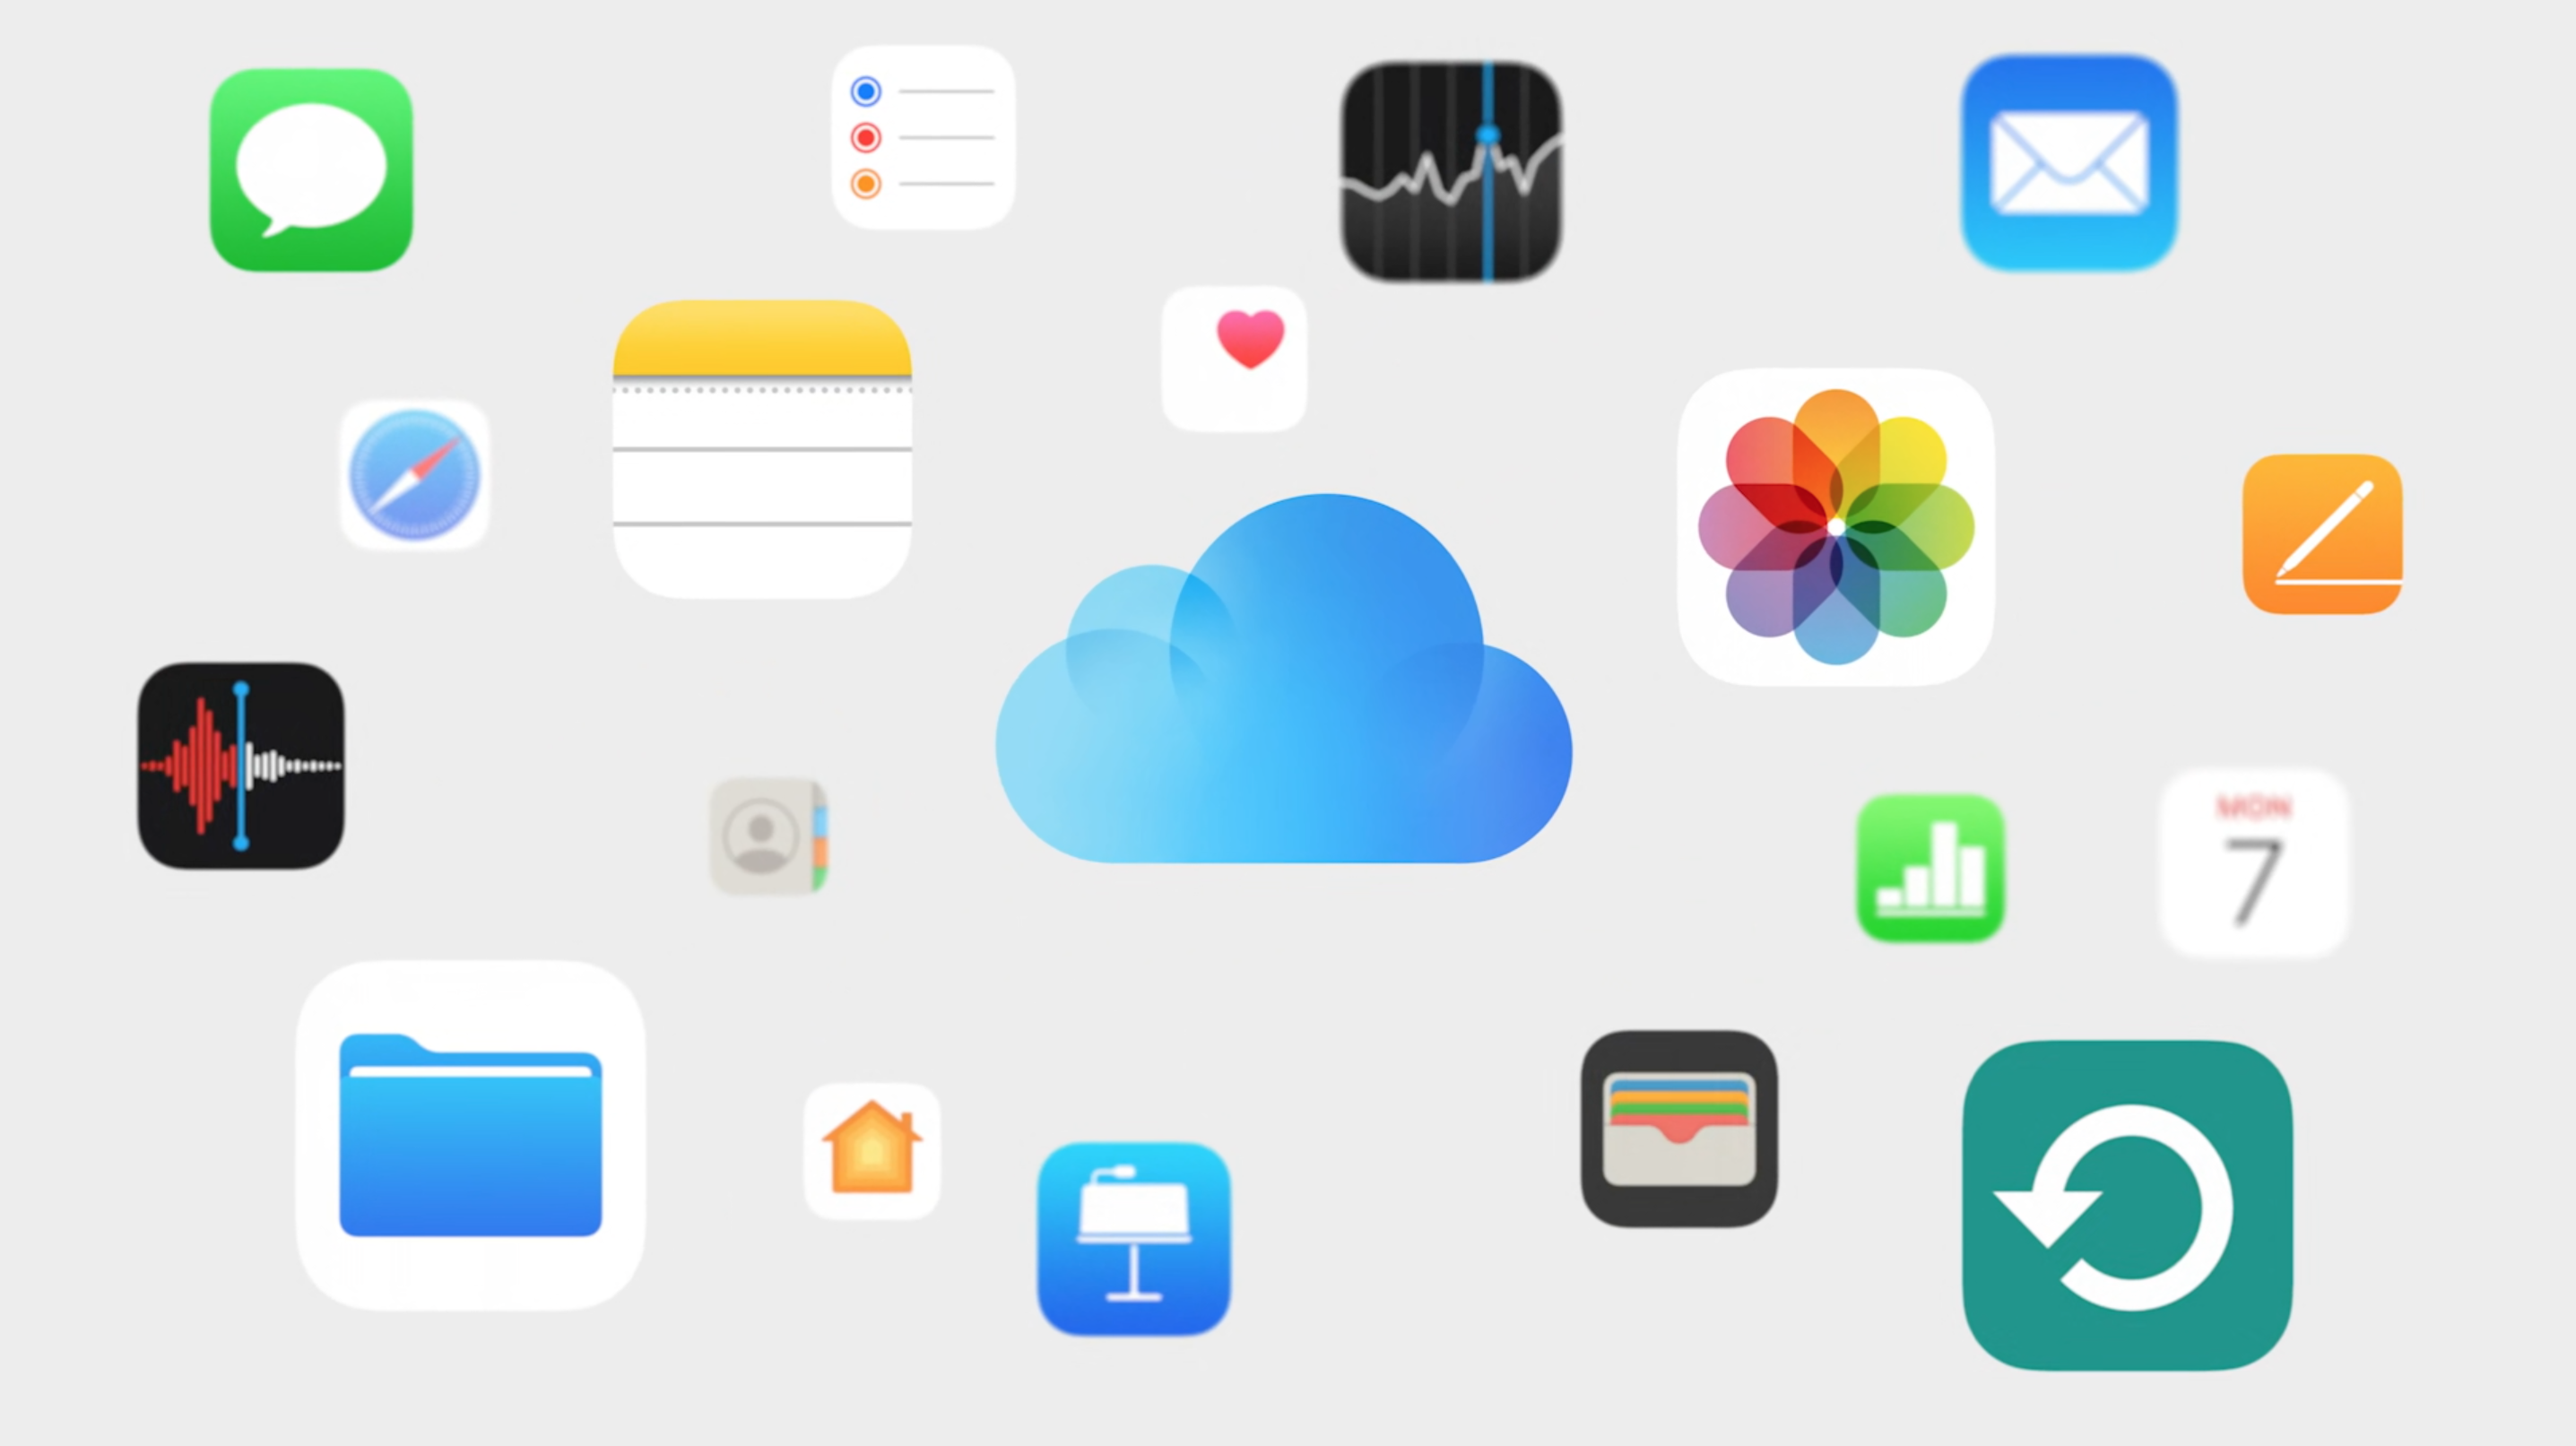 Apple unveiled a redesigned web version of iCloud